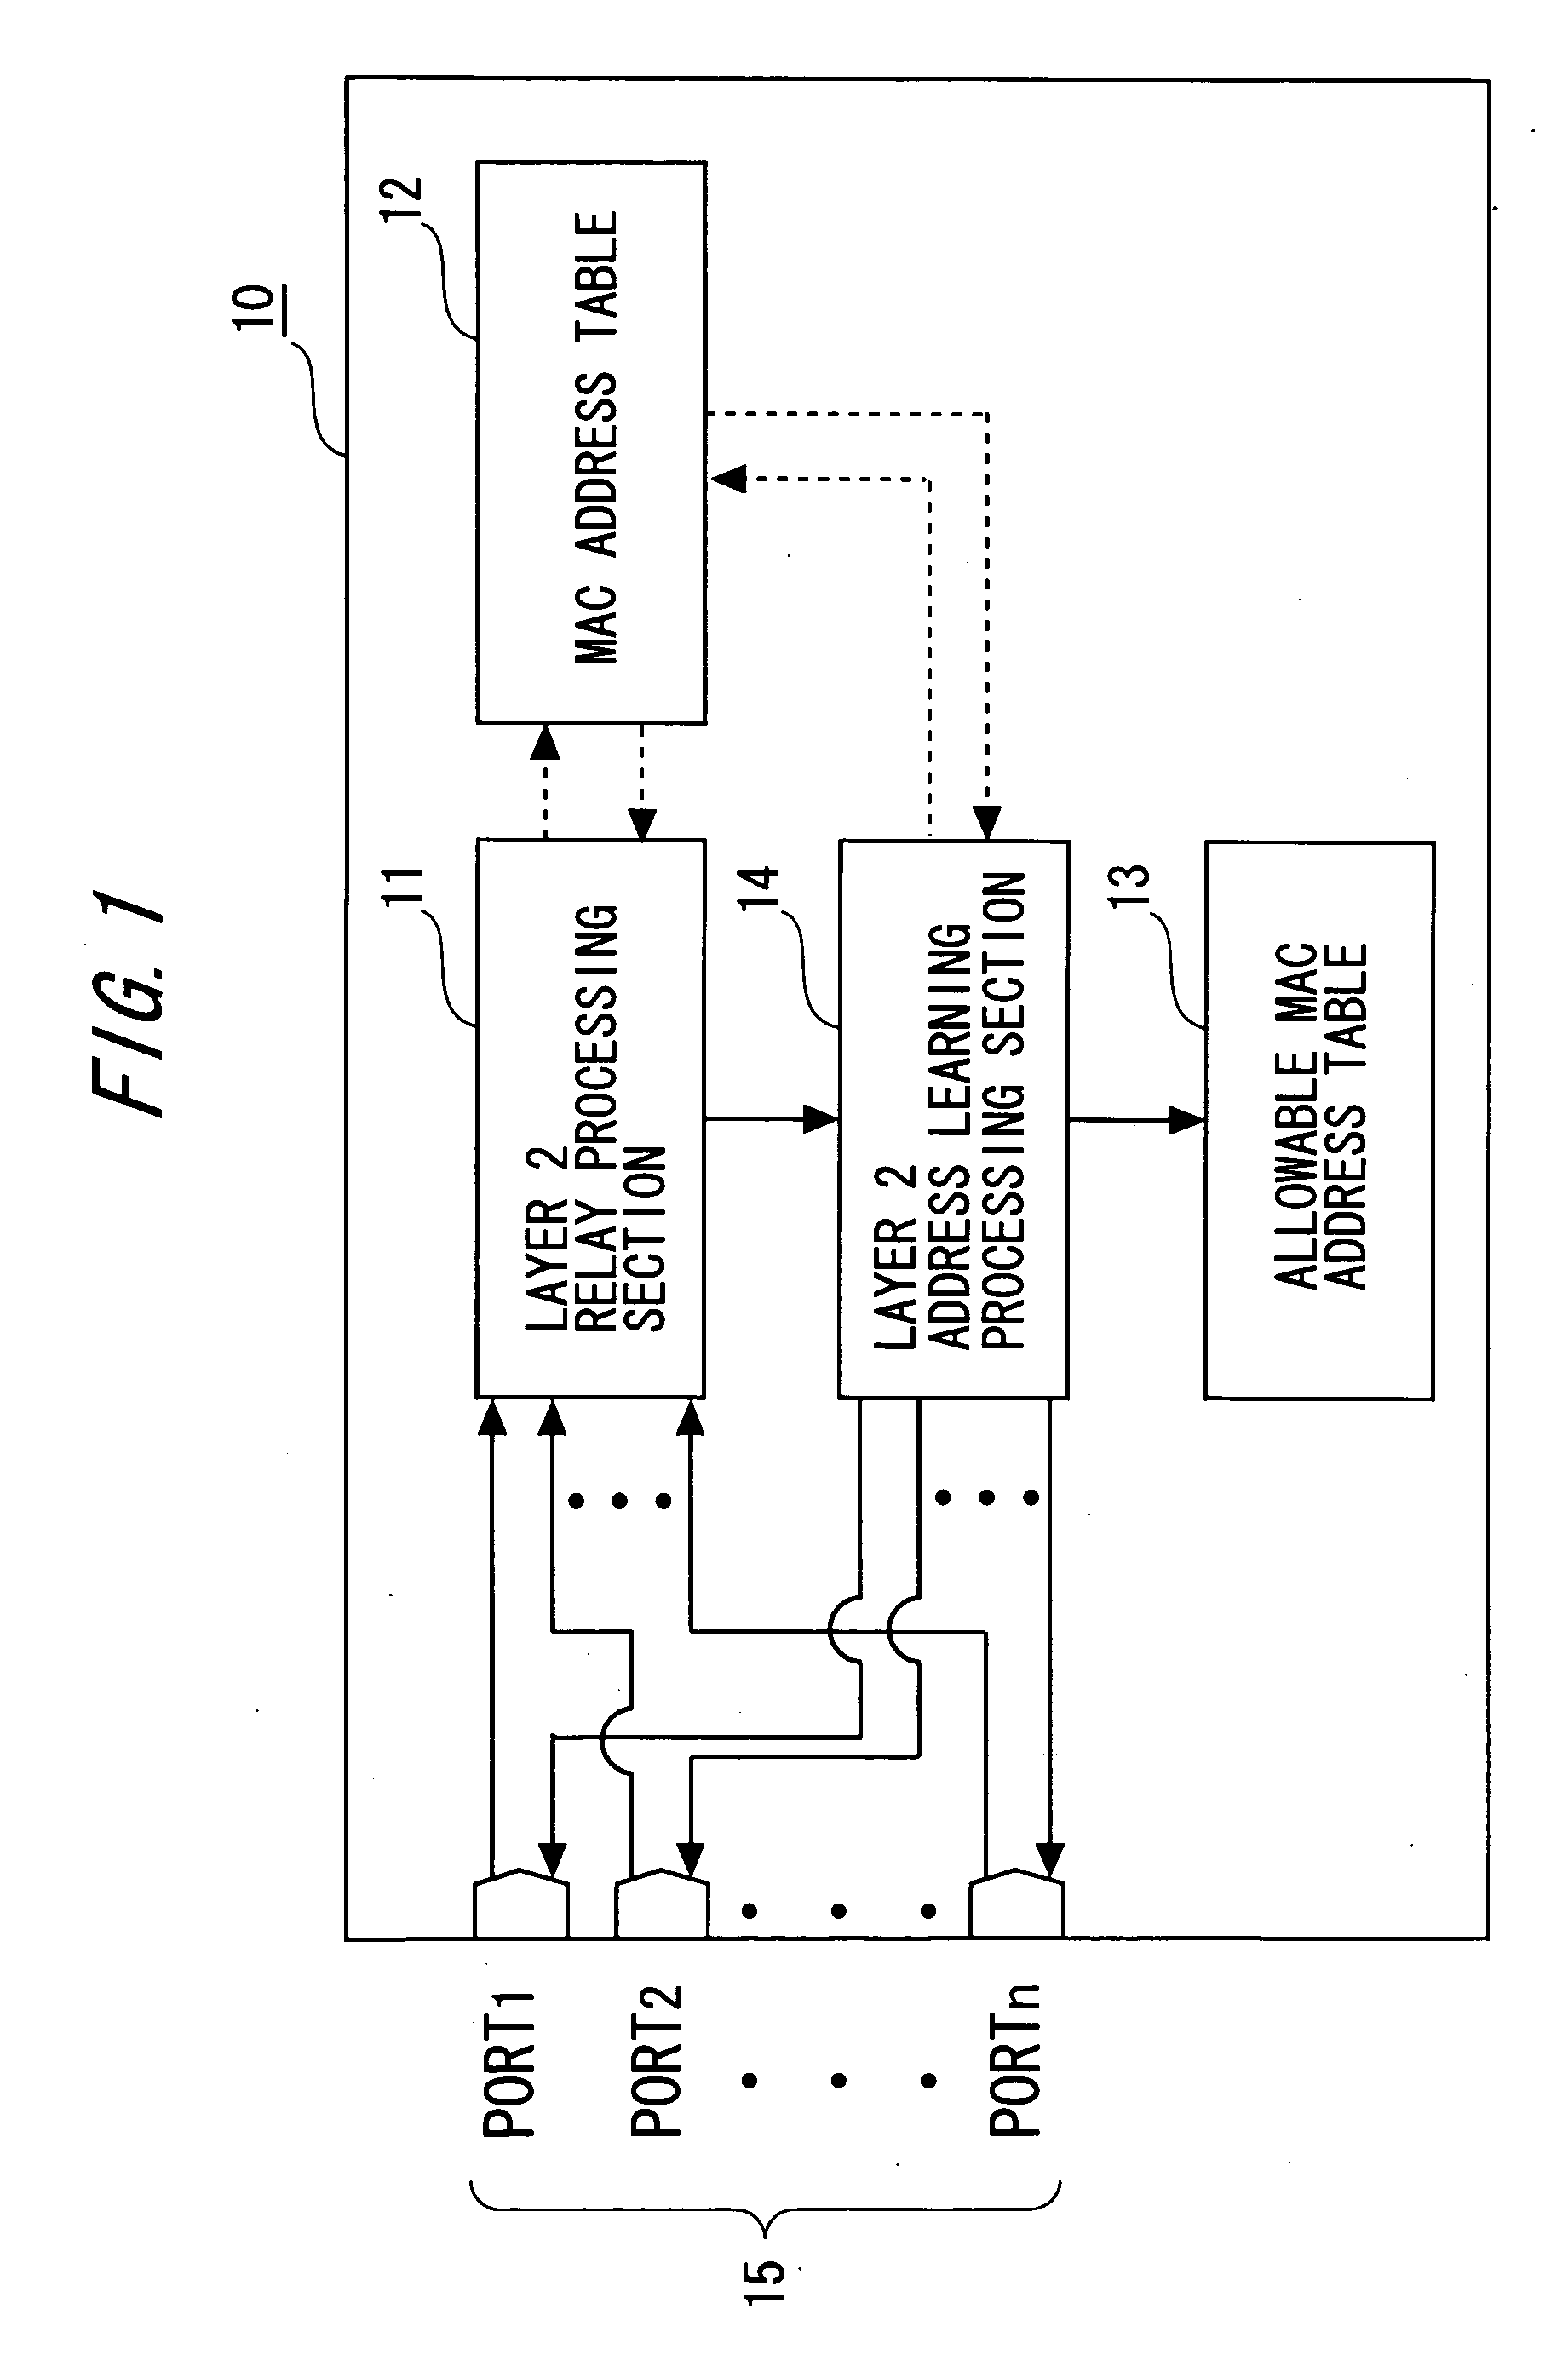 Frame Relay Device